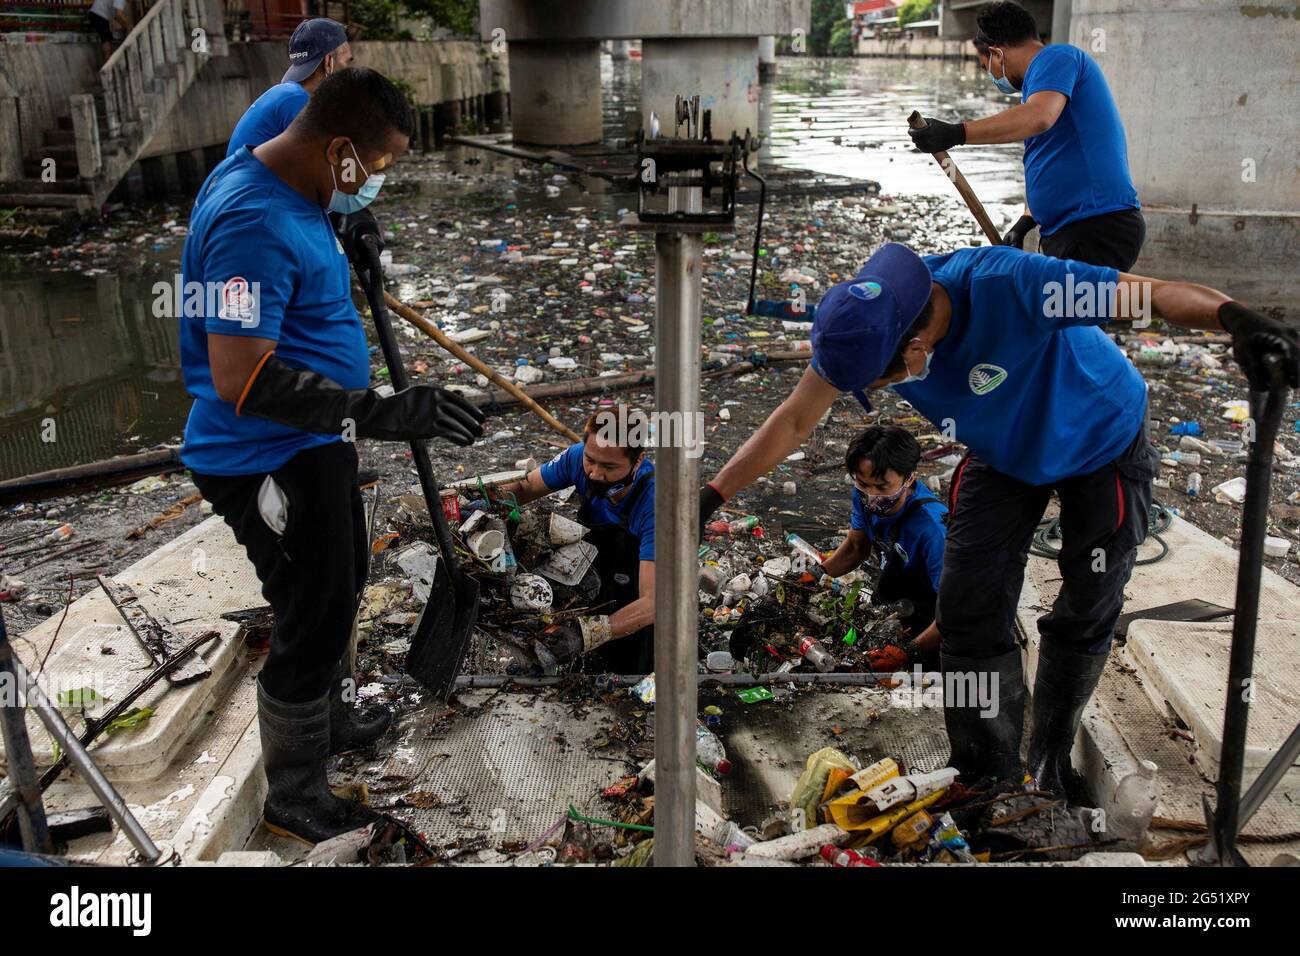 Members of the River Warriors gather trash to a 'trash boat' from the heavily polluted San Juan River, a tributary of Pasig River, in Mandaluyong City, Philippines, June 21, 2021. The 'River Warriors' is a group of volunteers founded over a decade ago whose sole purpose was to pick up garbage in and around Manila's Pasig River. Picture taken June 21, 2021. REUTERS/Eloisa Lopez Stock Photo